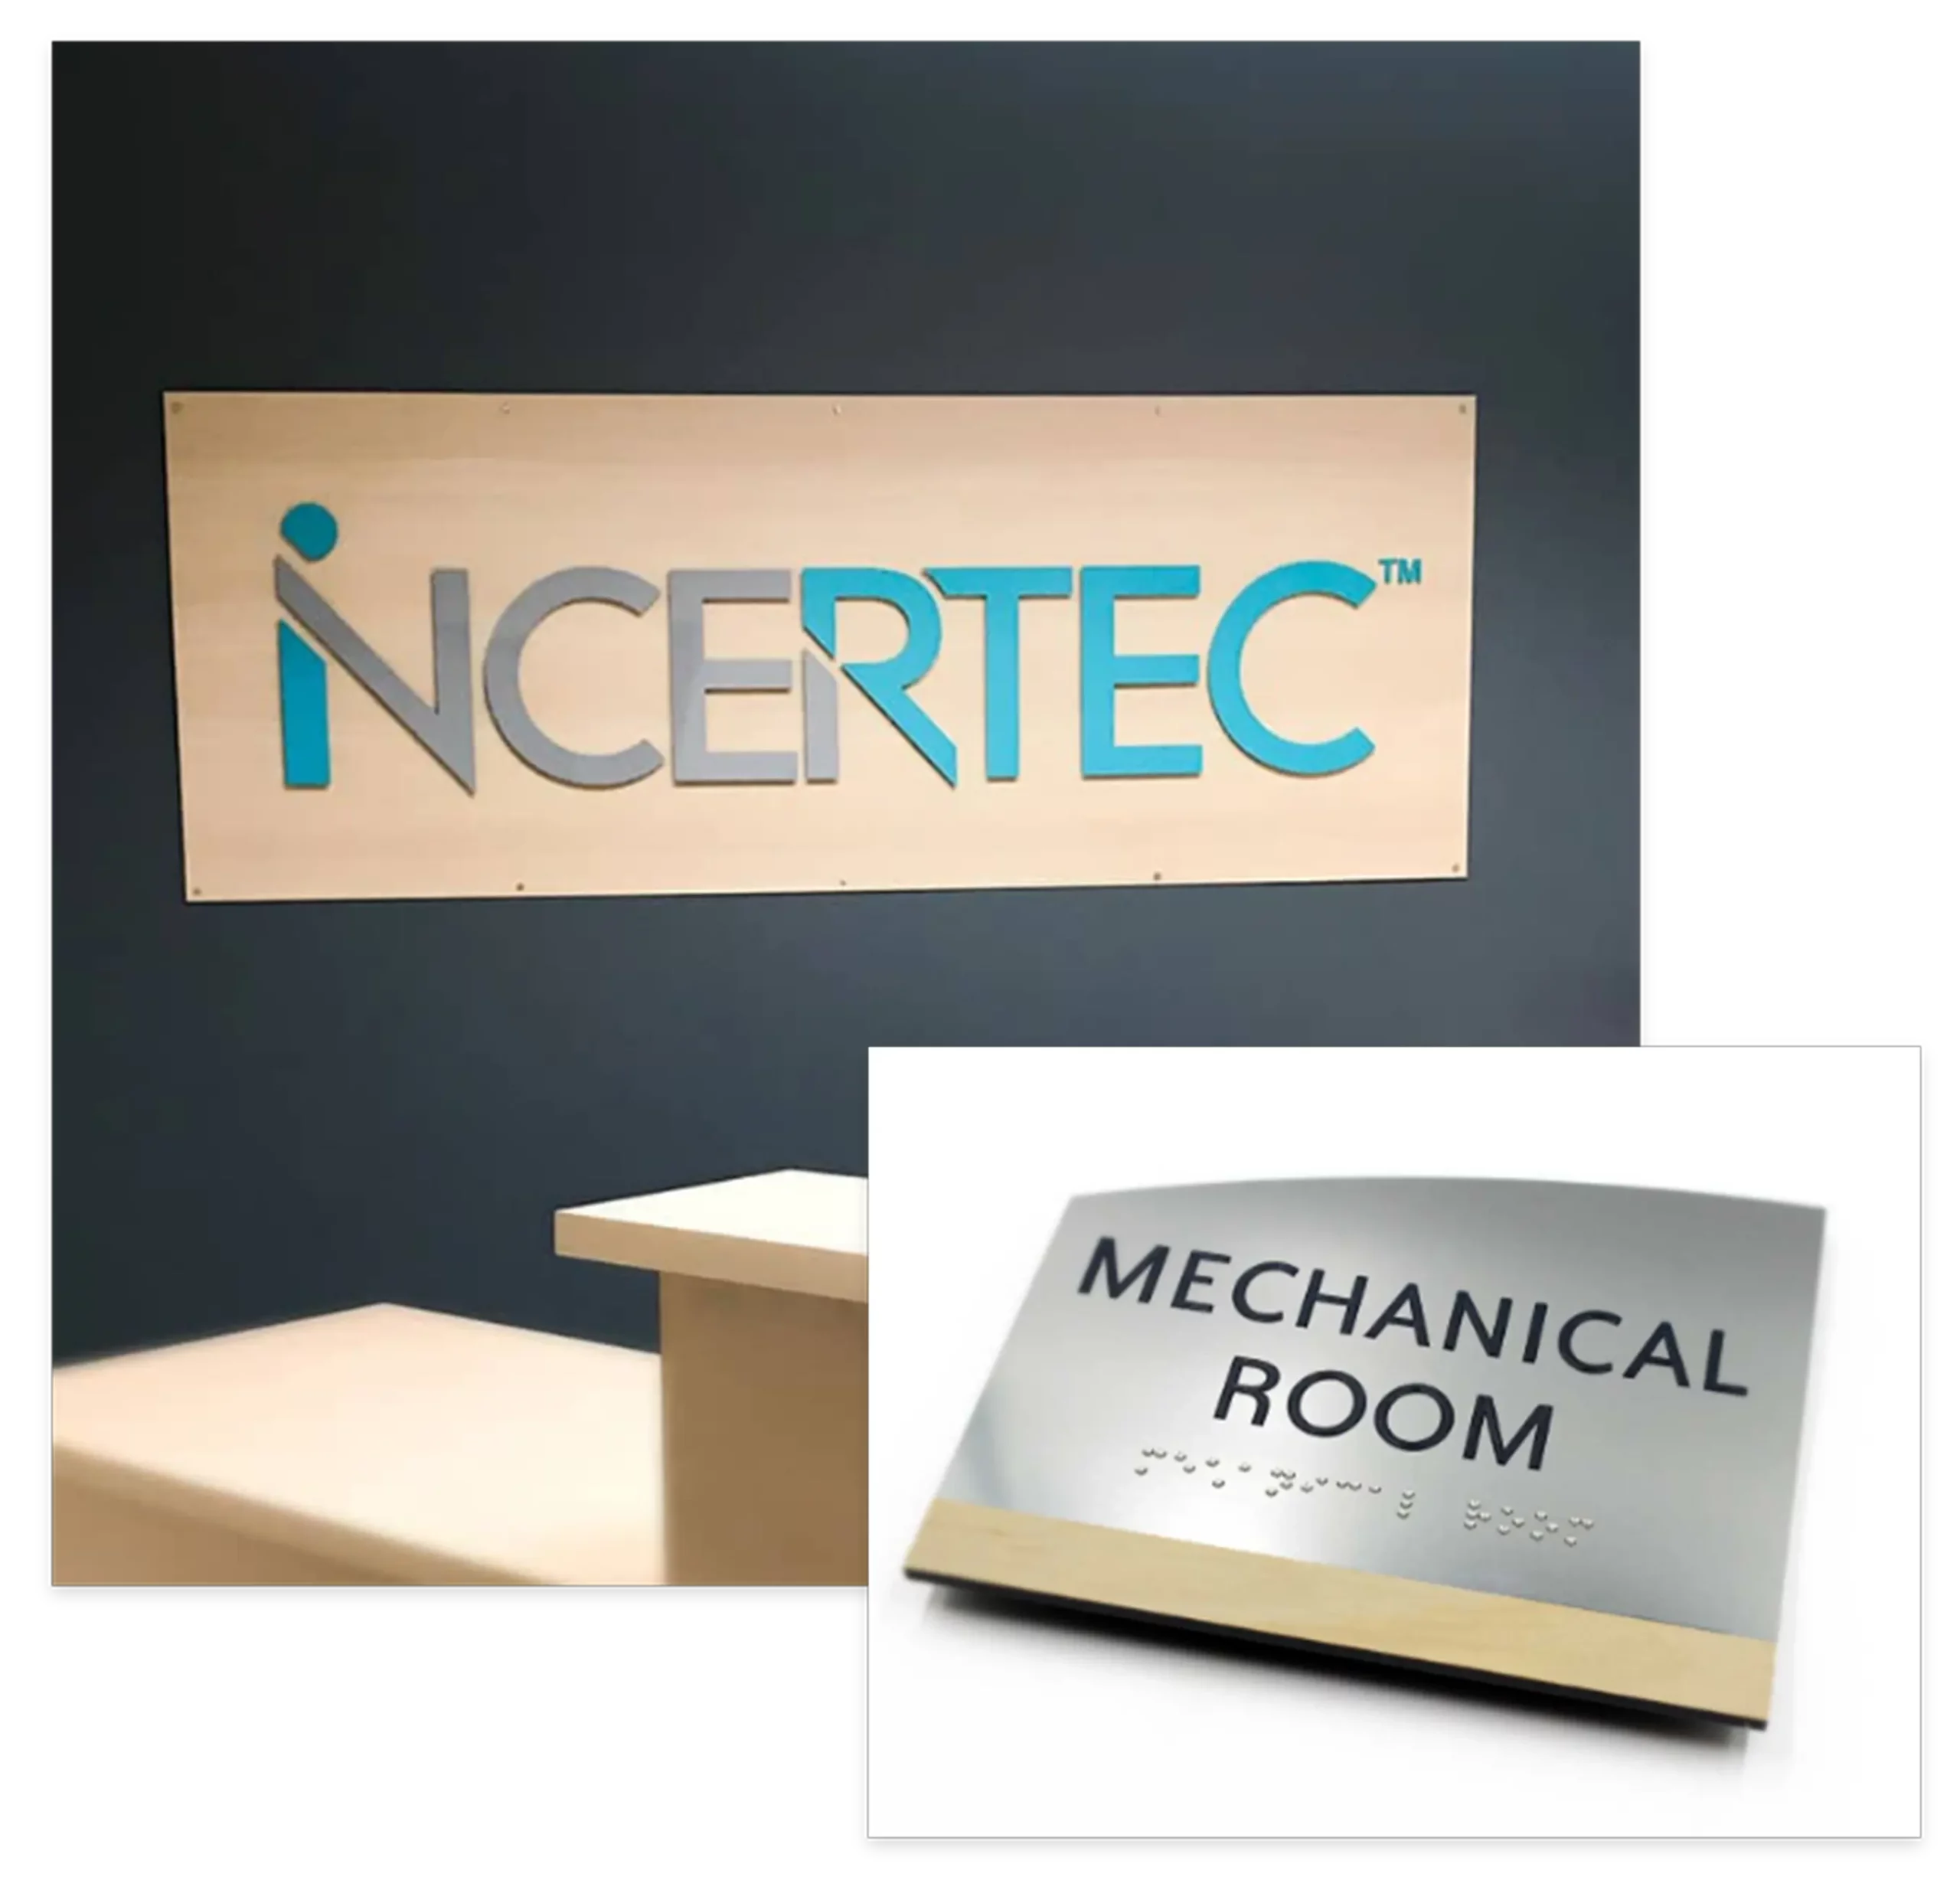 Incertec and Mechanical Room Sign, examples of manufacturing marketing with signs